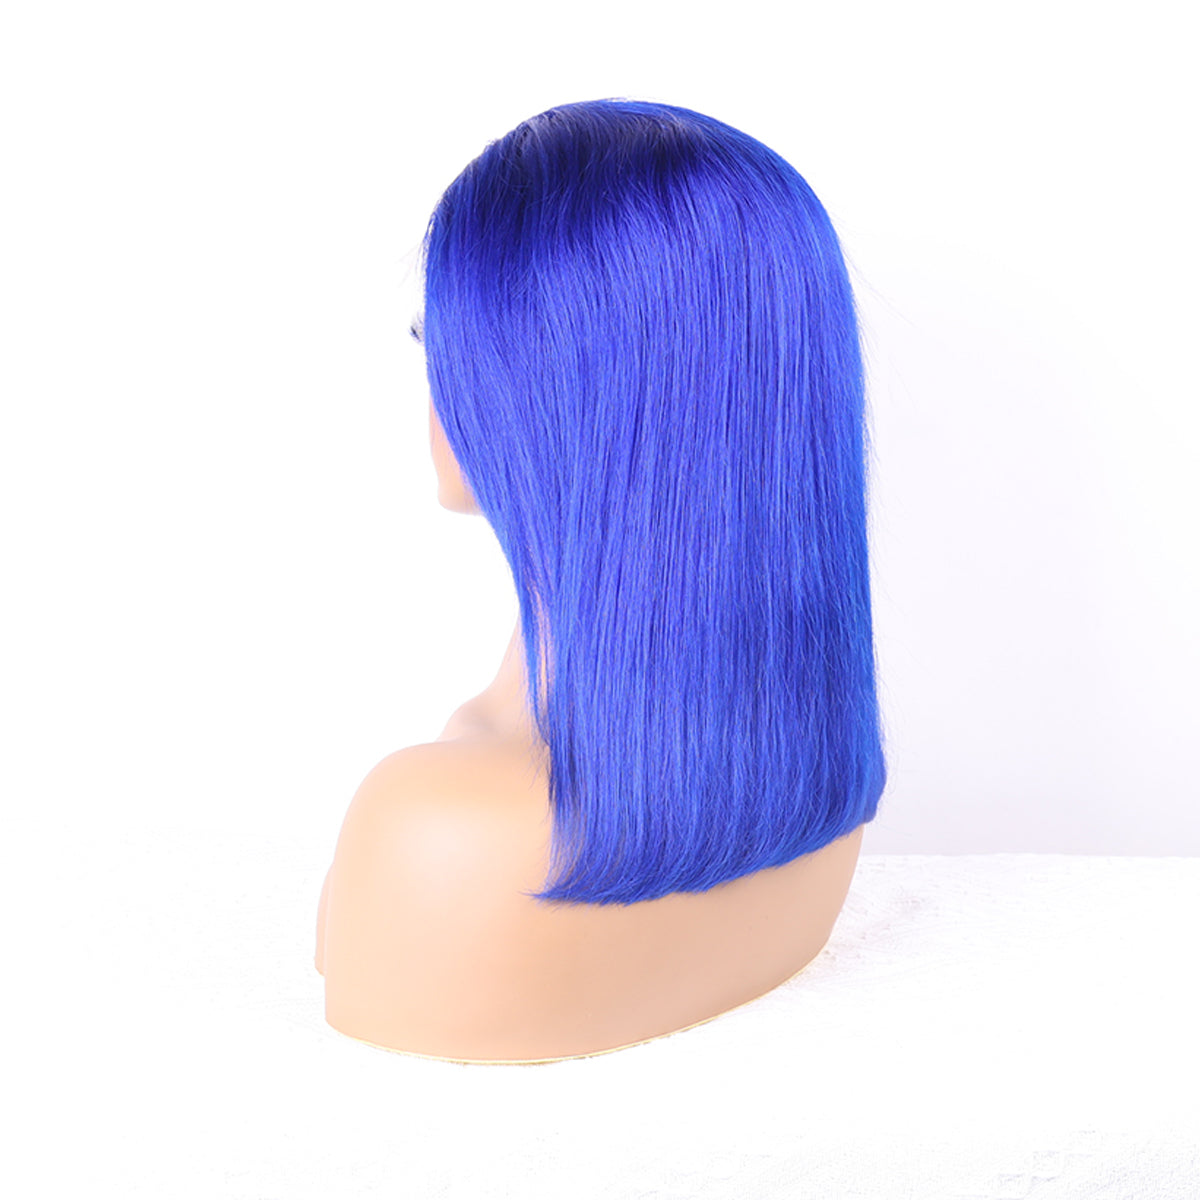 Roalblue Lace Front Wig Human Hair 13x4 Hd Lace Pink Straight Wigs 100%Human Hair Transparent Lace Human Hair Wigs